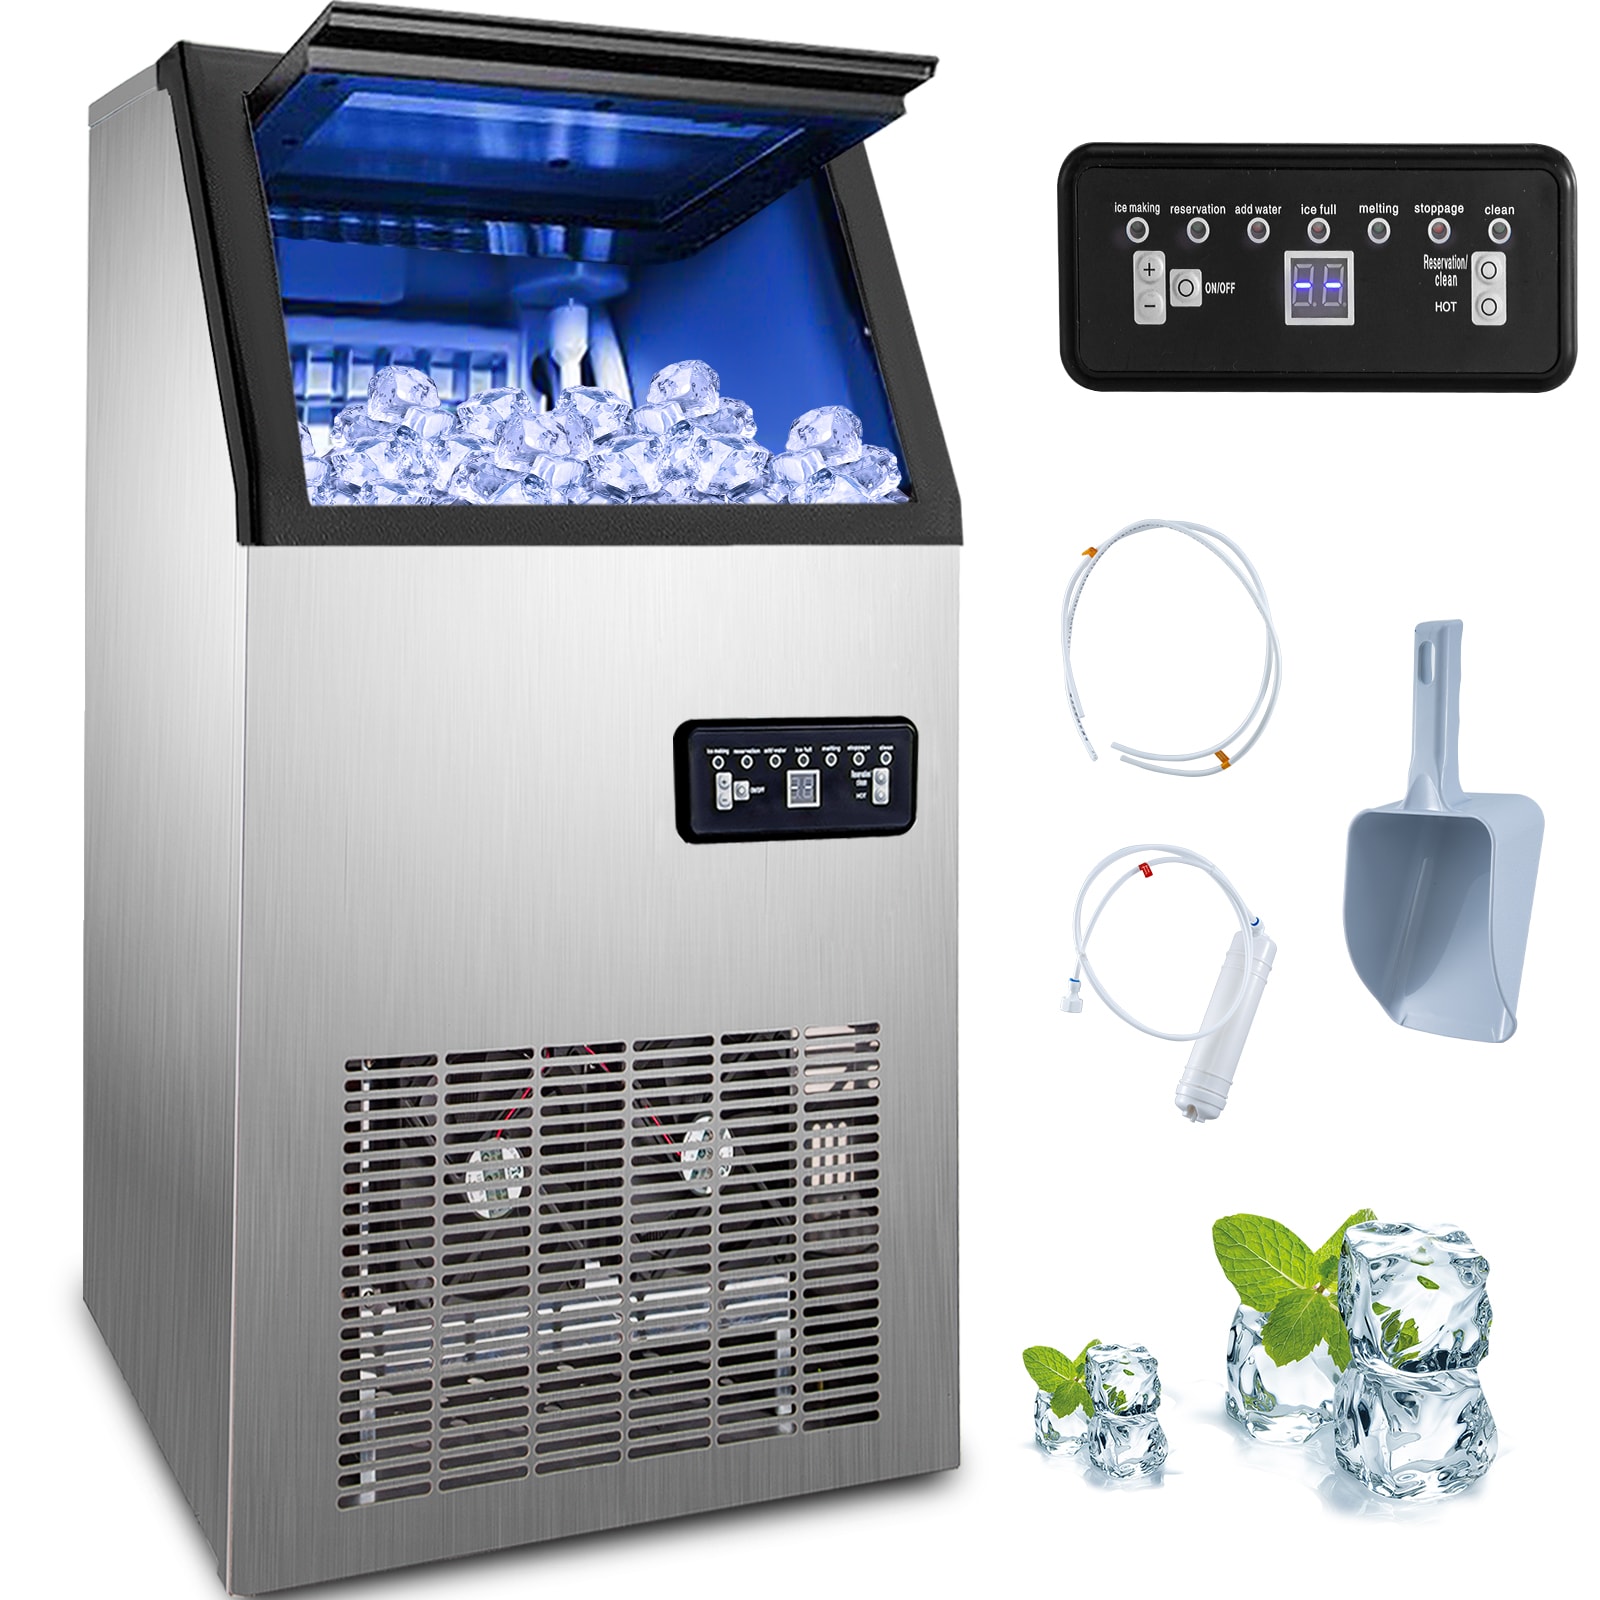 Cooler Depot Freestanding Commercial Nugget Ice Maker in Stainless